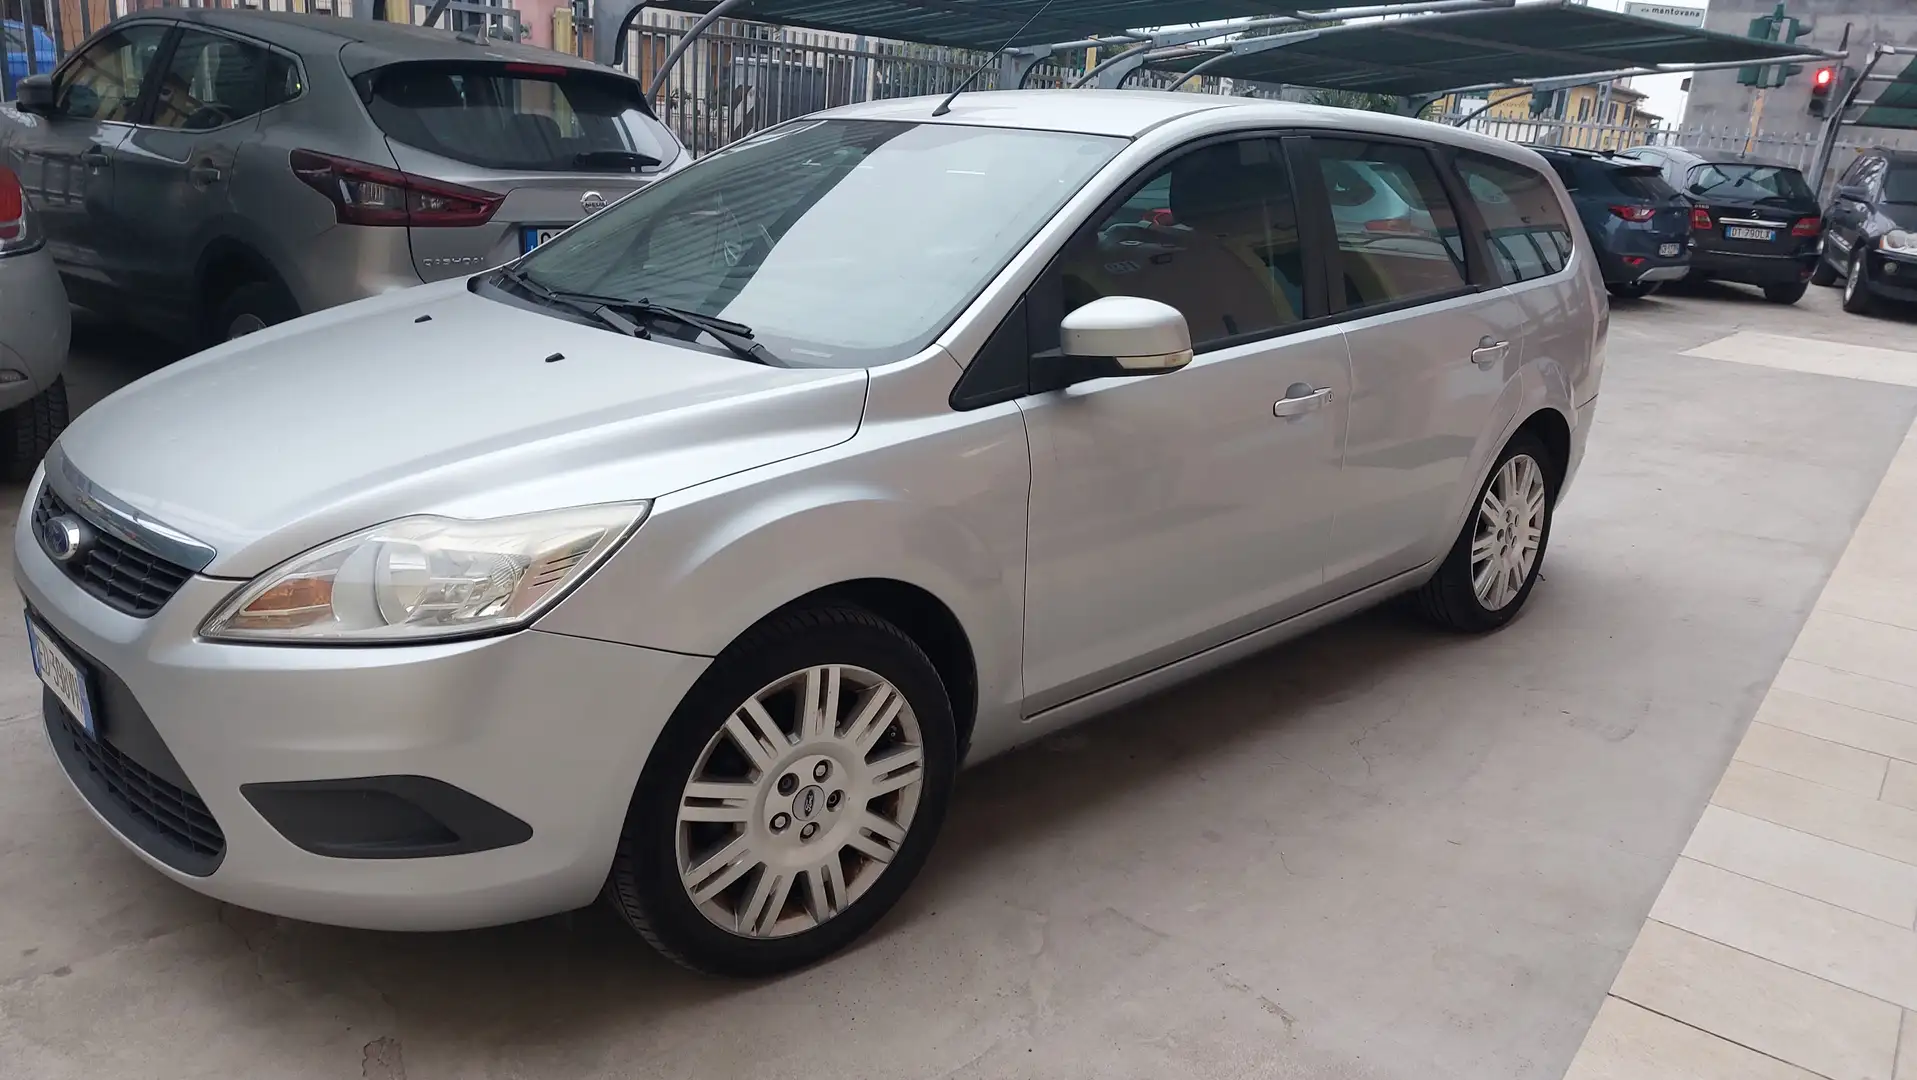 Ford Focus Focus Style Wagon 1.6 tdci Ikon (+) dpf Argent - 2